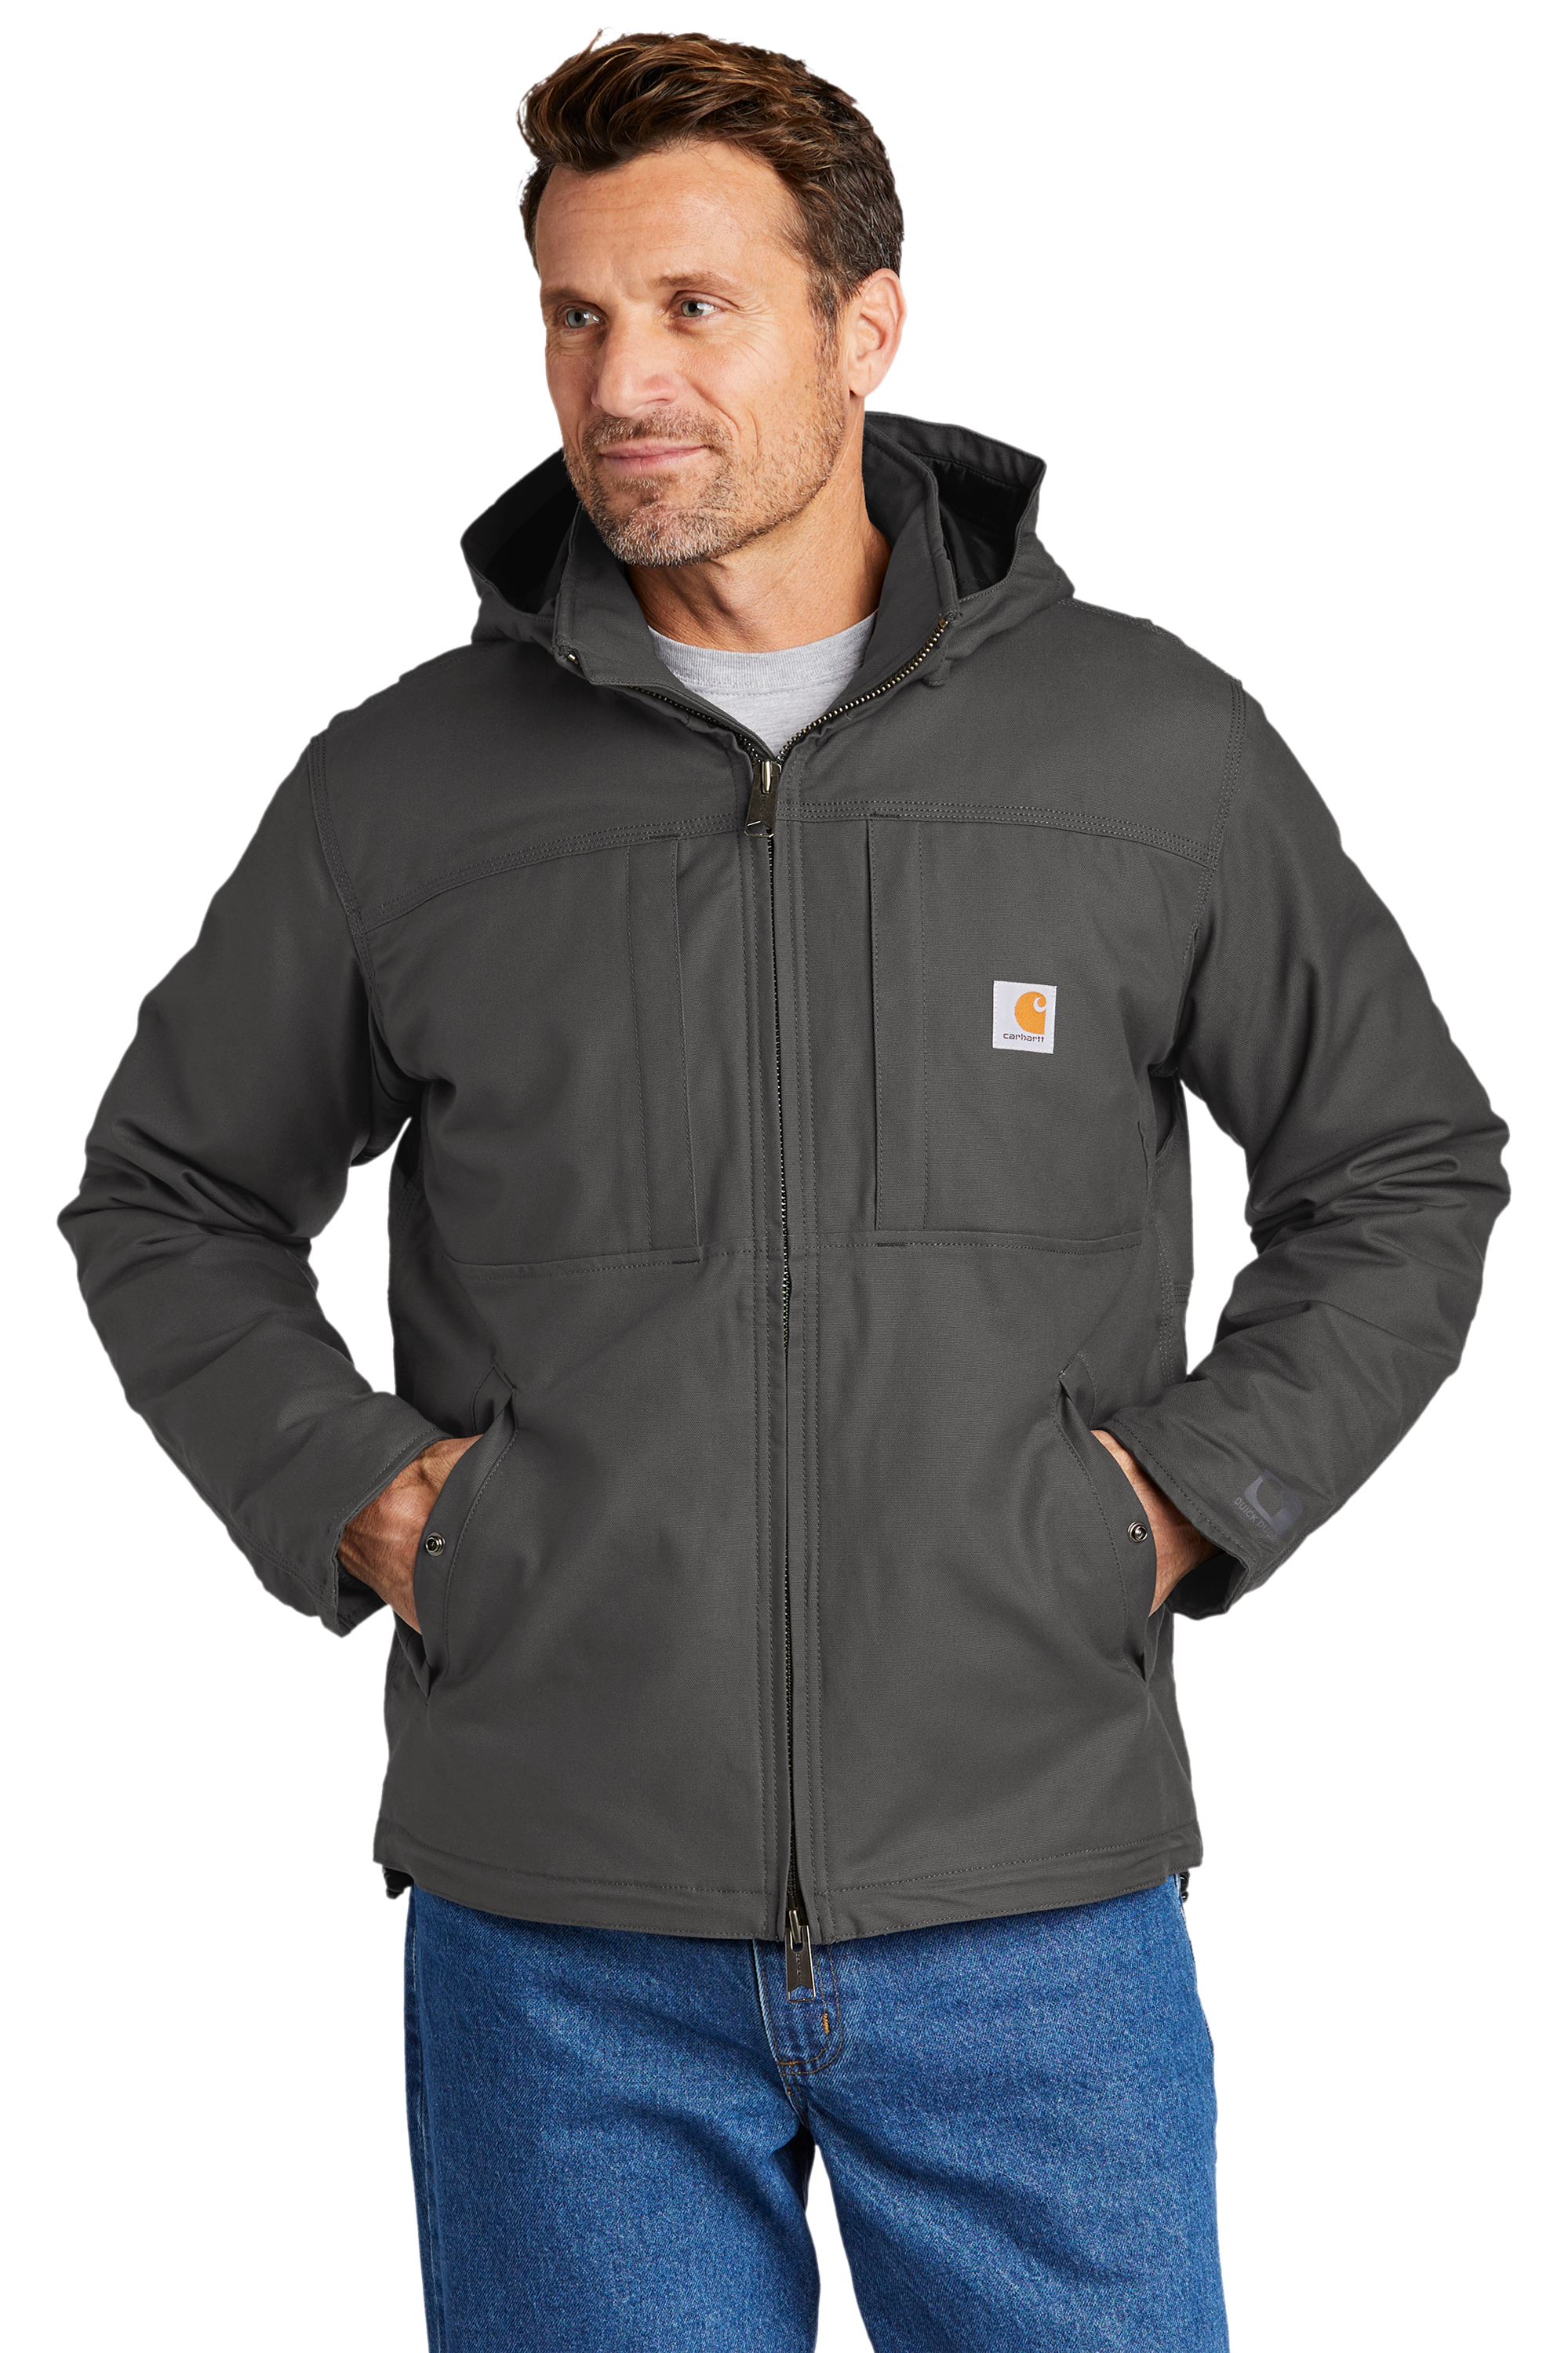 Carhartt Embroidered Men's Swing Cryder Jacket | Outerwear - Queensboro